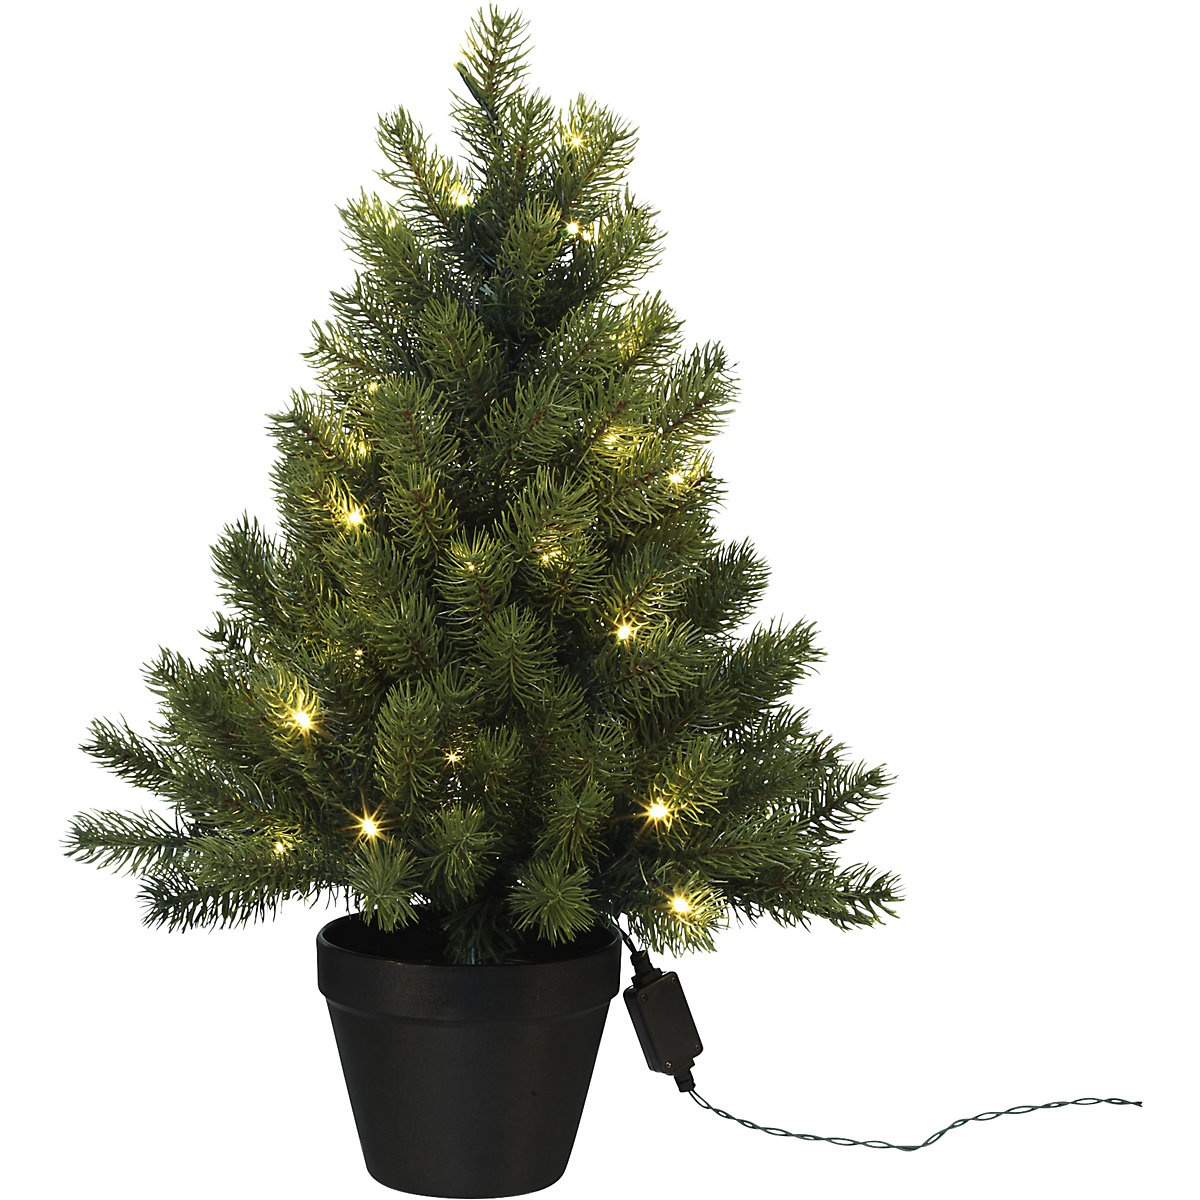 Fir tree in a pot with LEDs